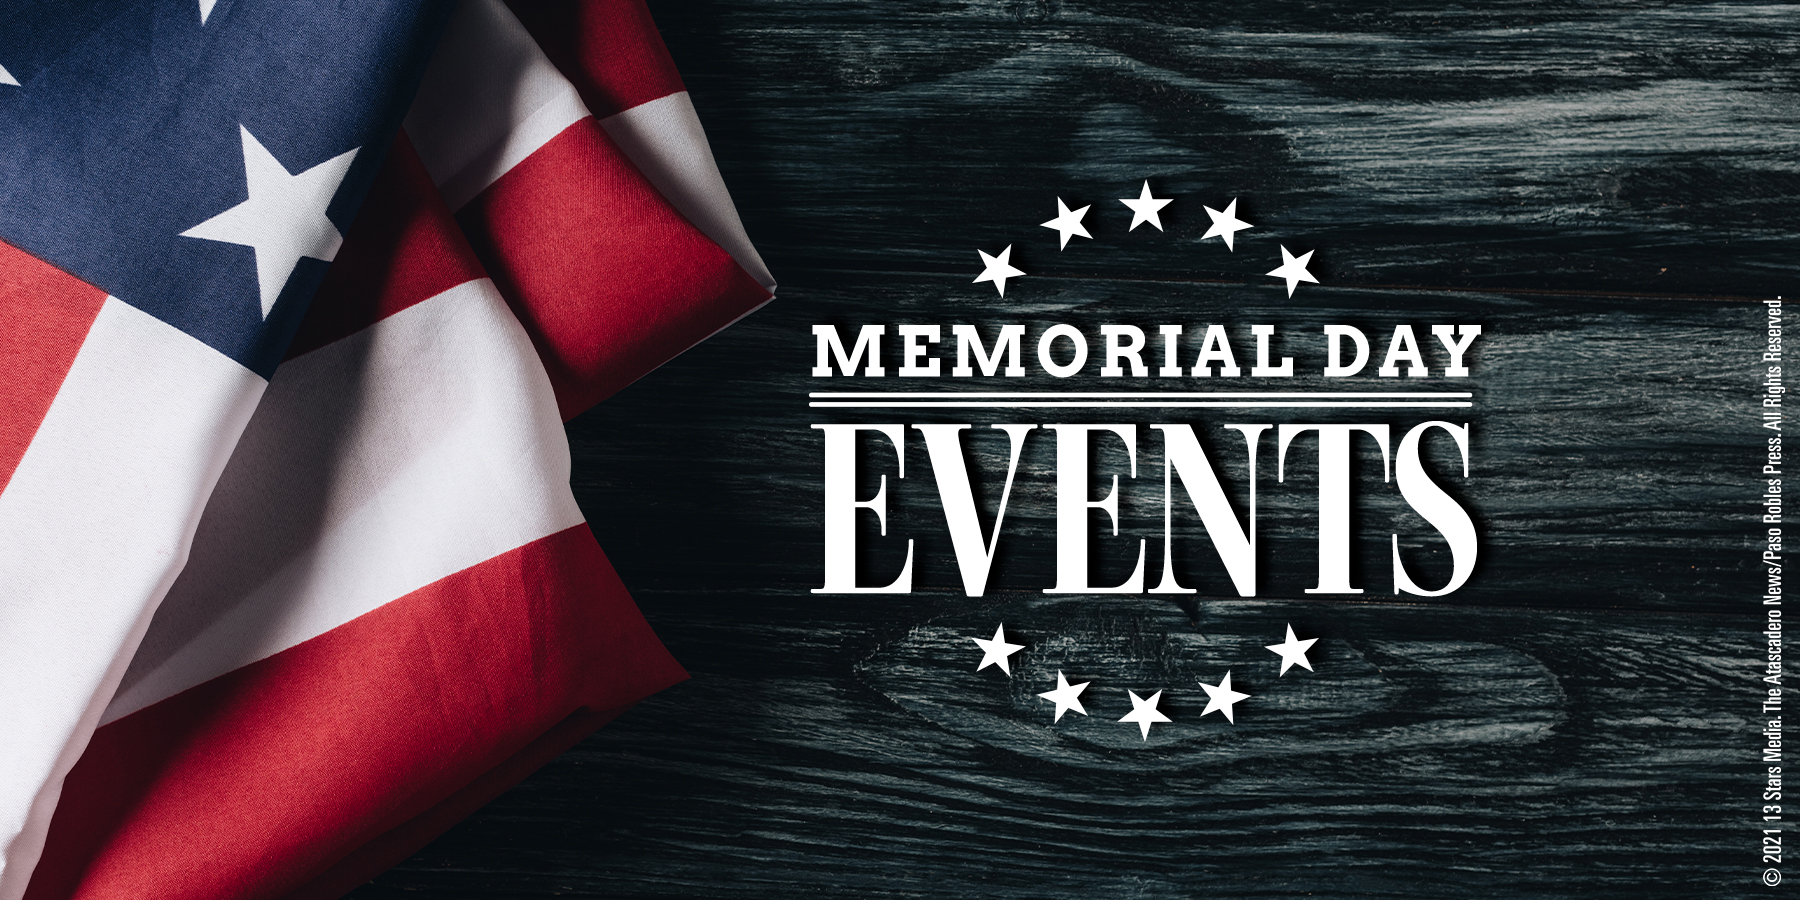 SLO County Memorial Day Weekend Events • Paso Robles Press